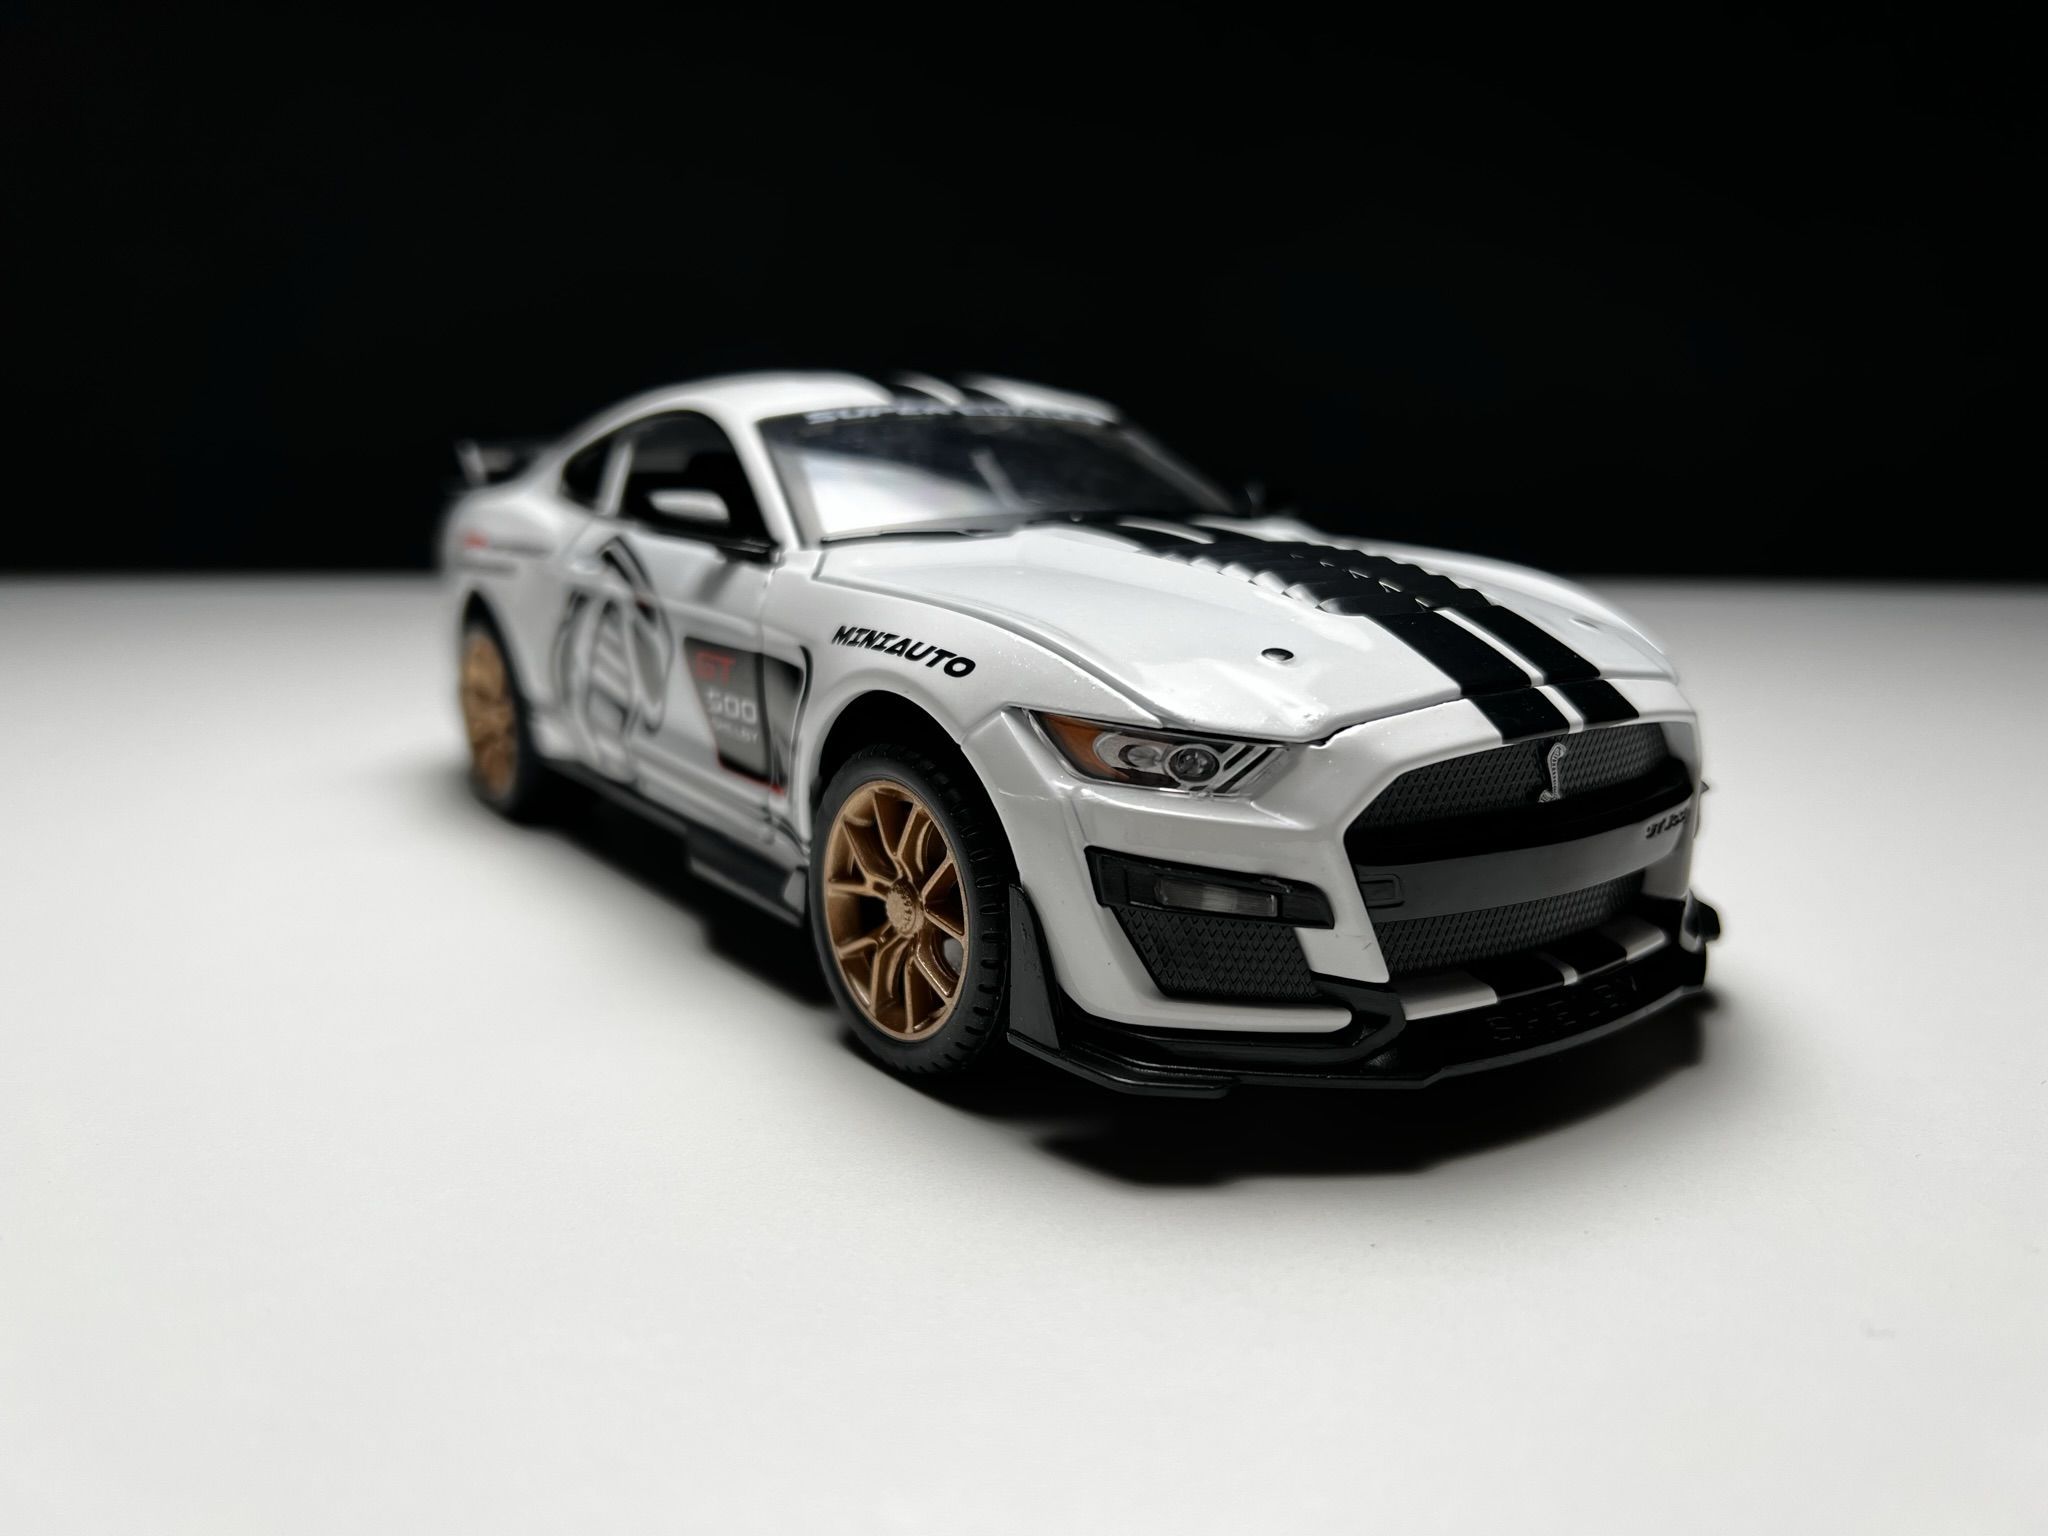 Машинка металлическая Элемент Ford Mustang Shelby 1:24 машинка hot wheels hbl96 hcy71 металлическая 21 ford mustang